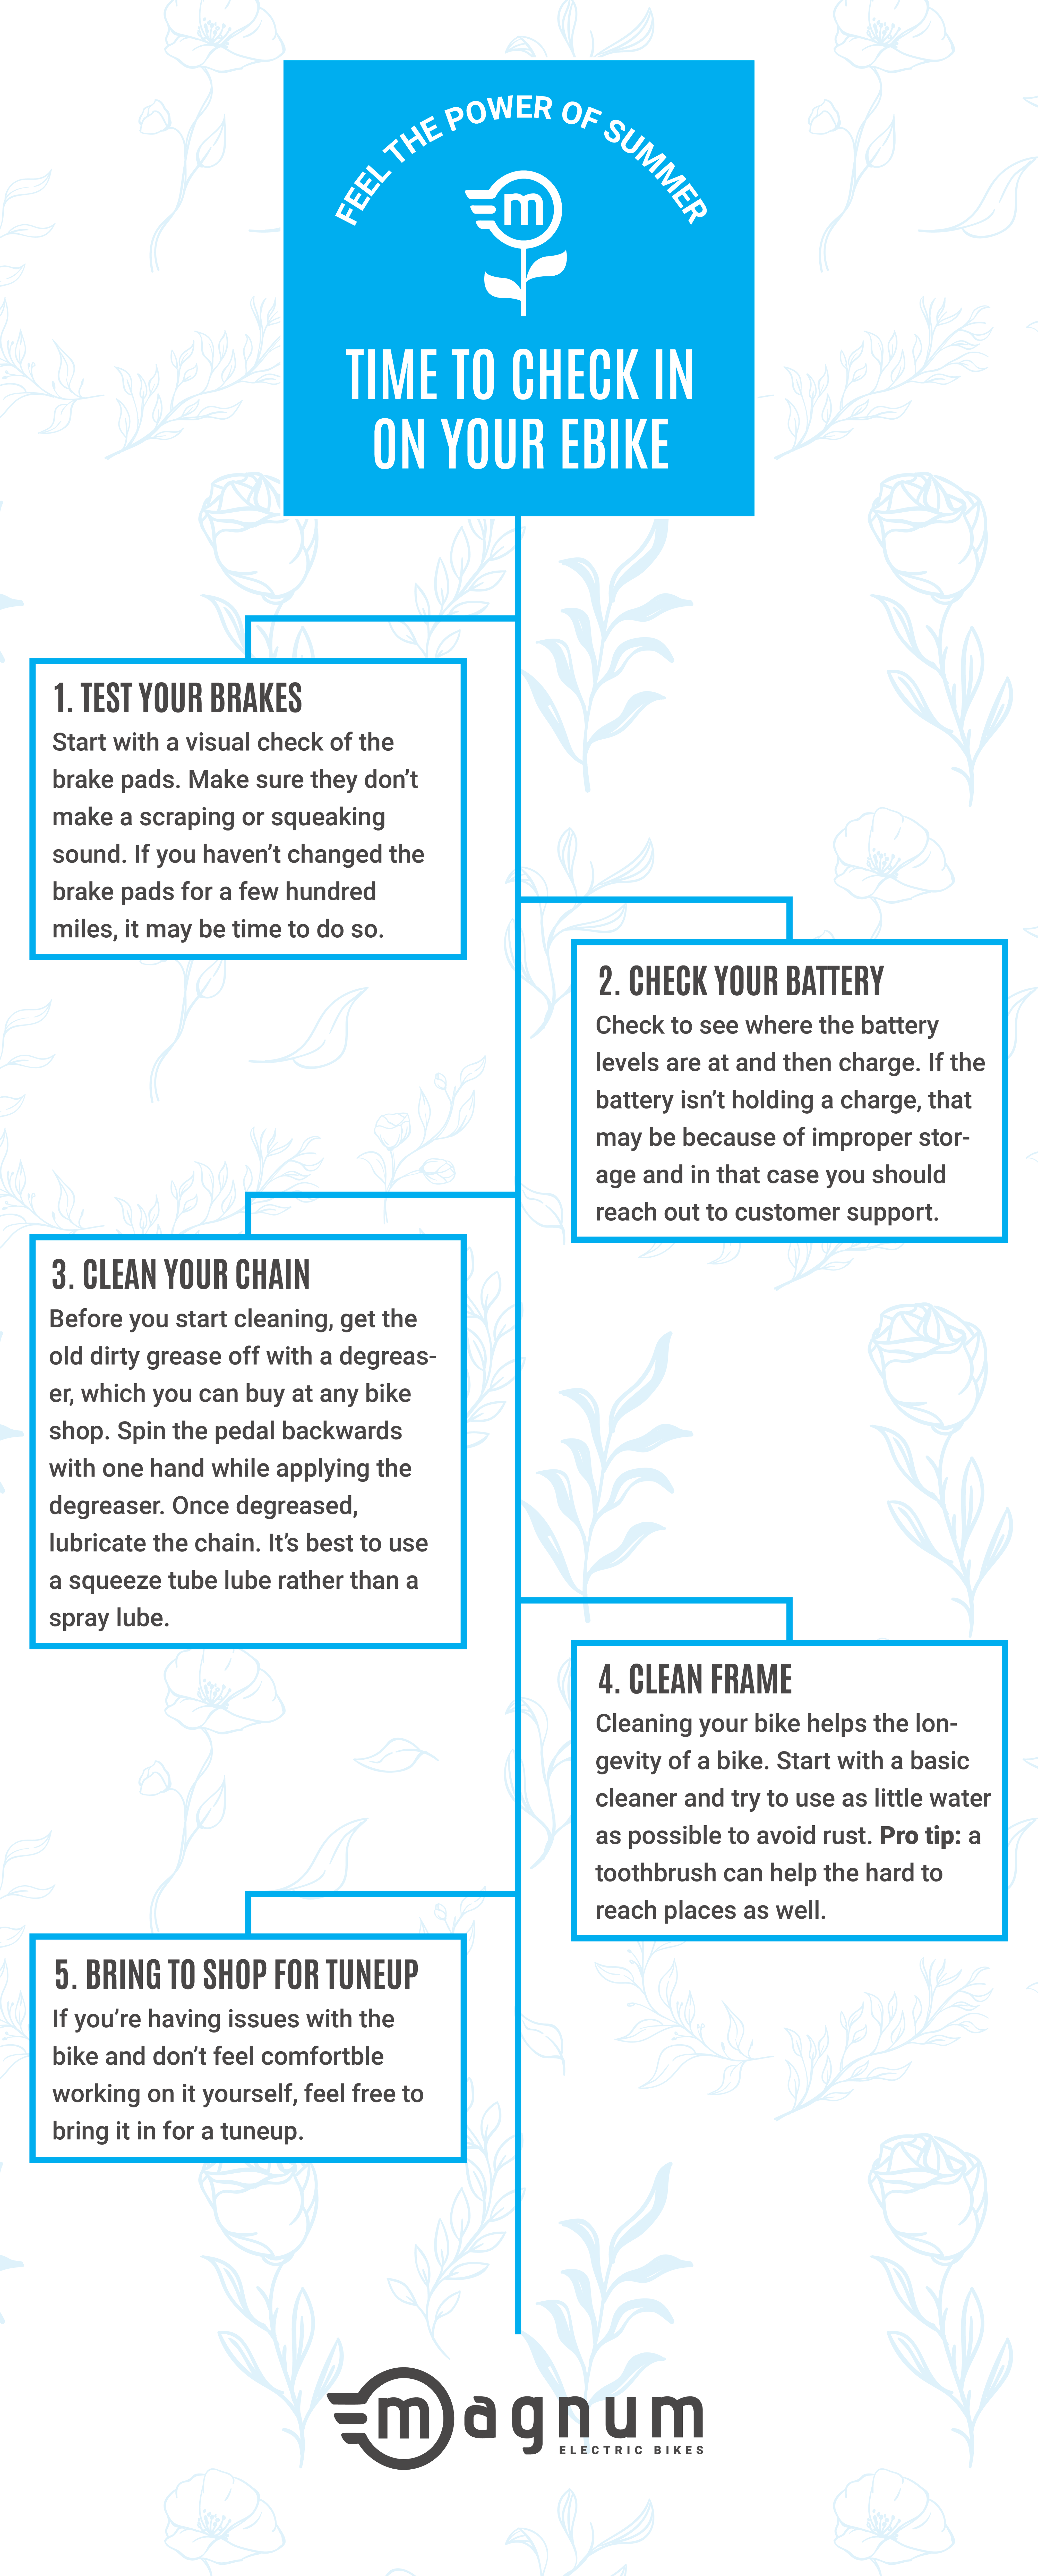 Infographic with floral pattern on white background, blue header, and text-based tips for electric bike tune-ups in the summer